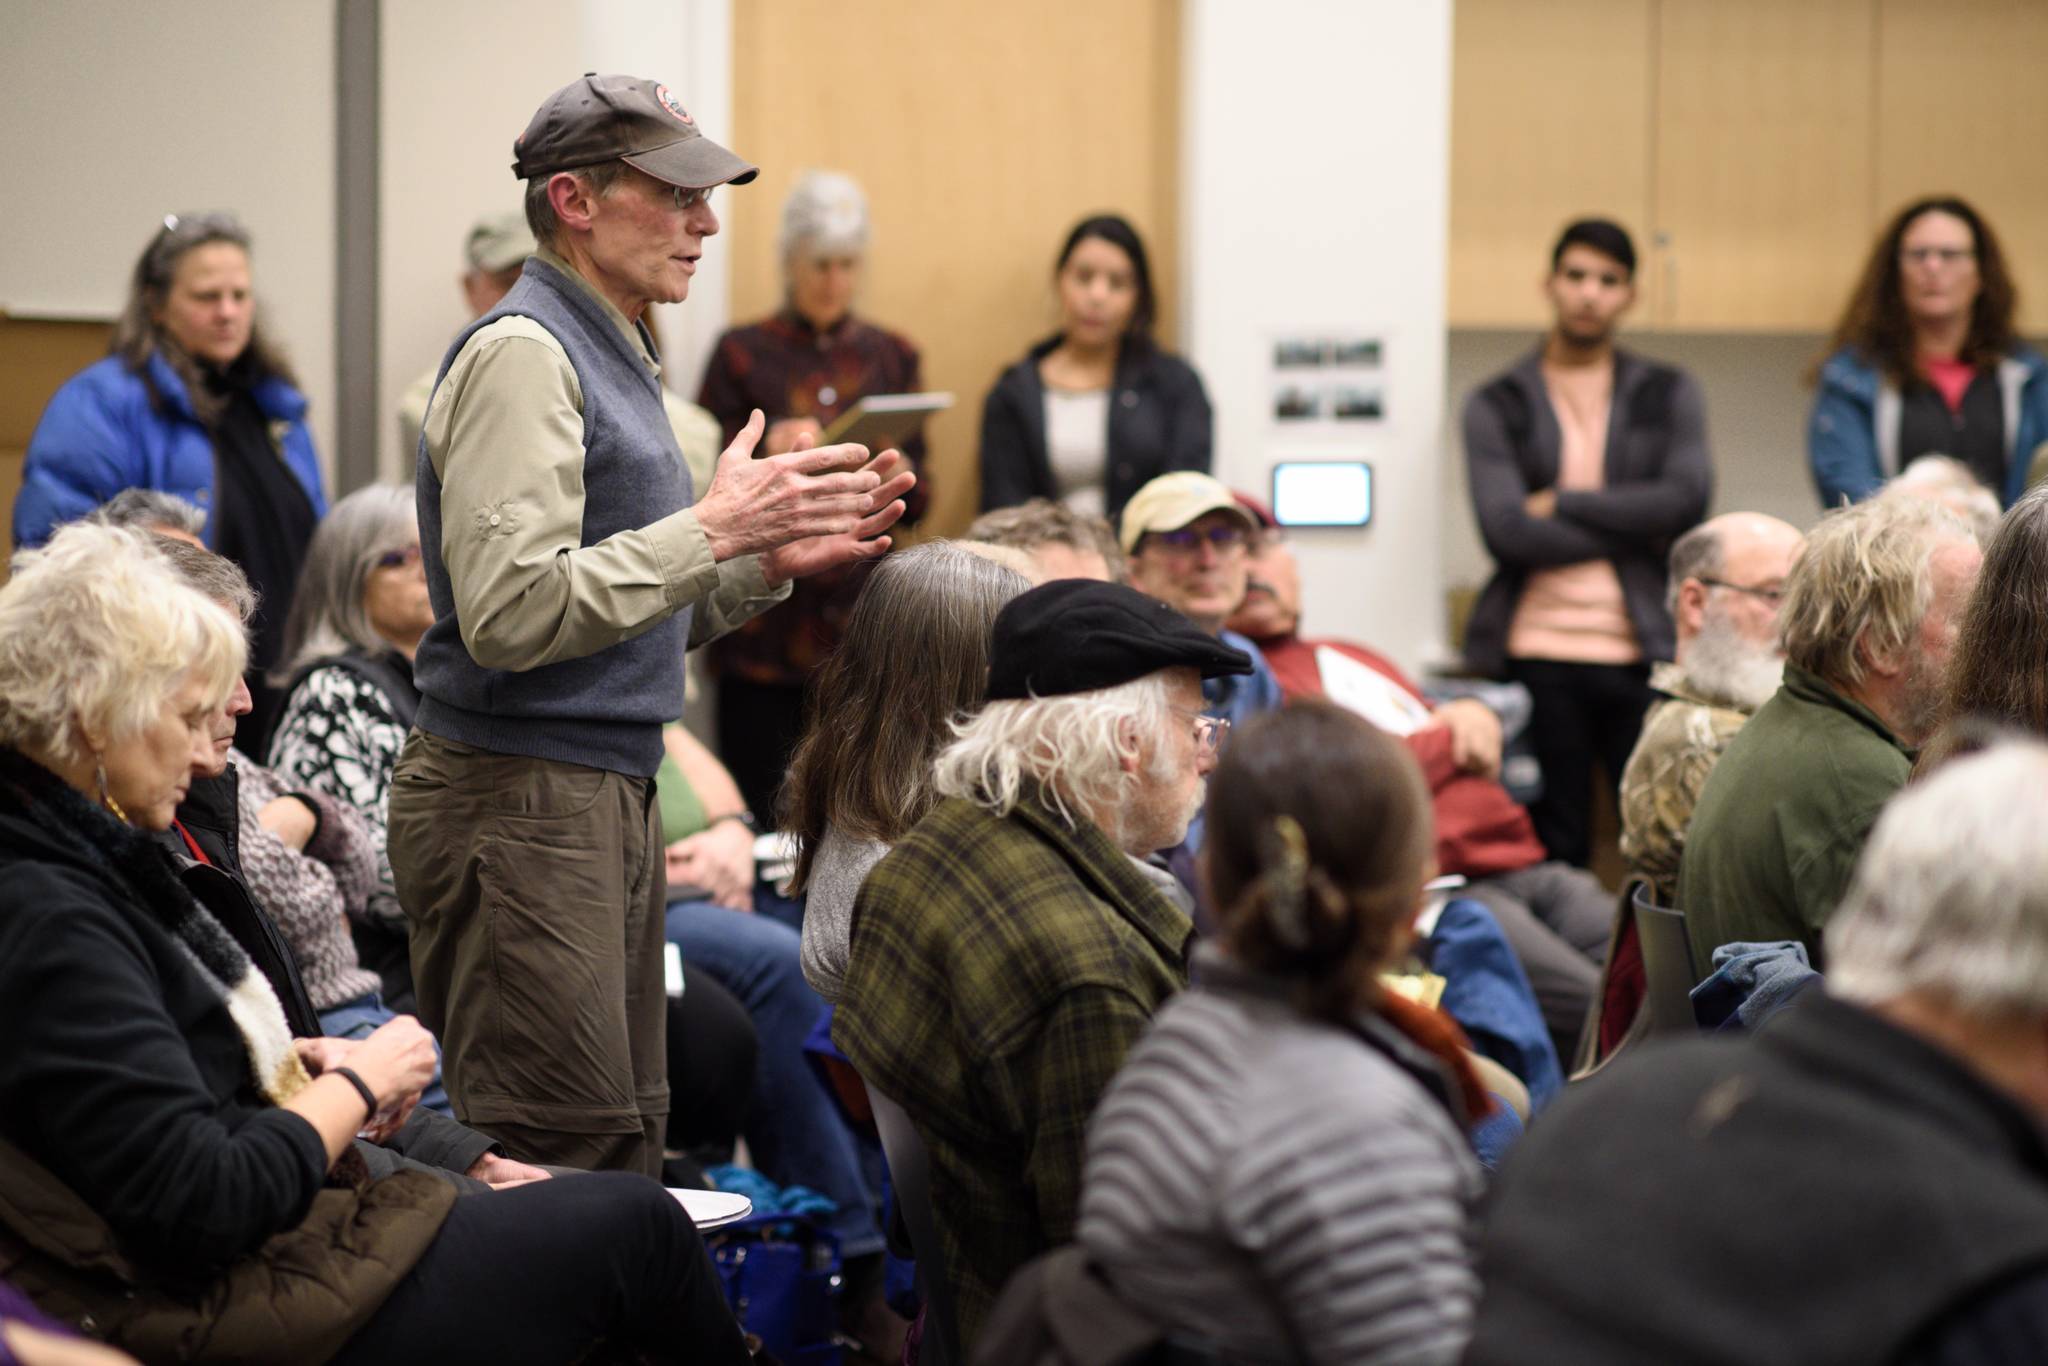 Gene Miller speaks up during a standing-room only town hall meeting featuring Juneau’s new legislators at the Mendenhall Valley Public Library on Tuesday, Jan. 29, 2019. (Michael Penn | Juneau Empire)